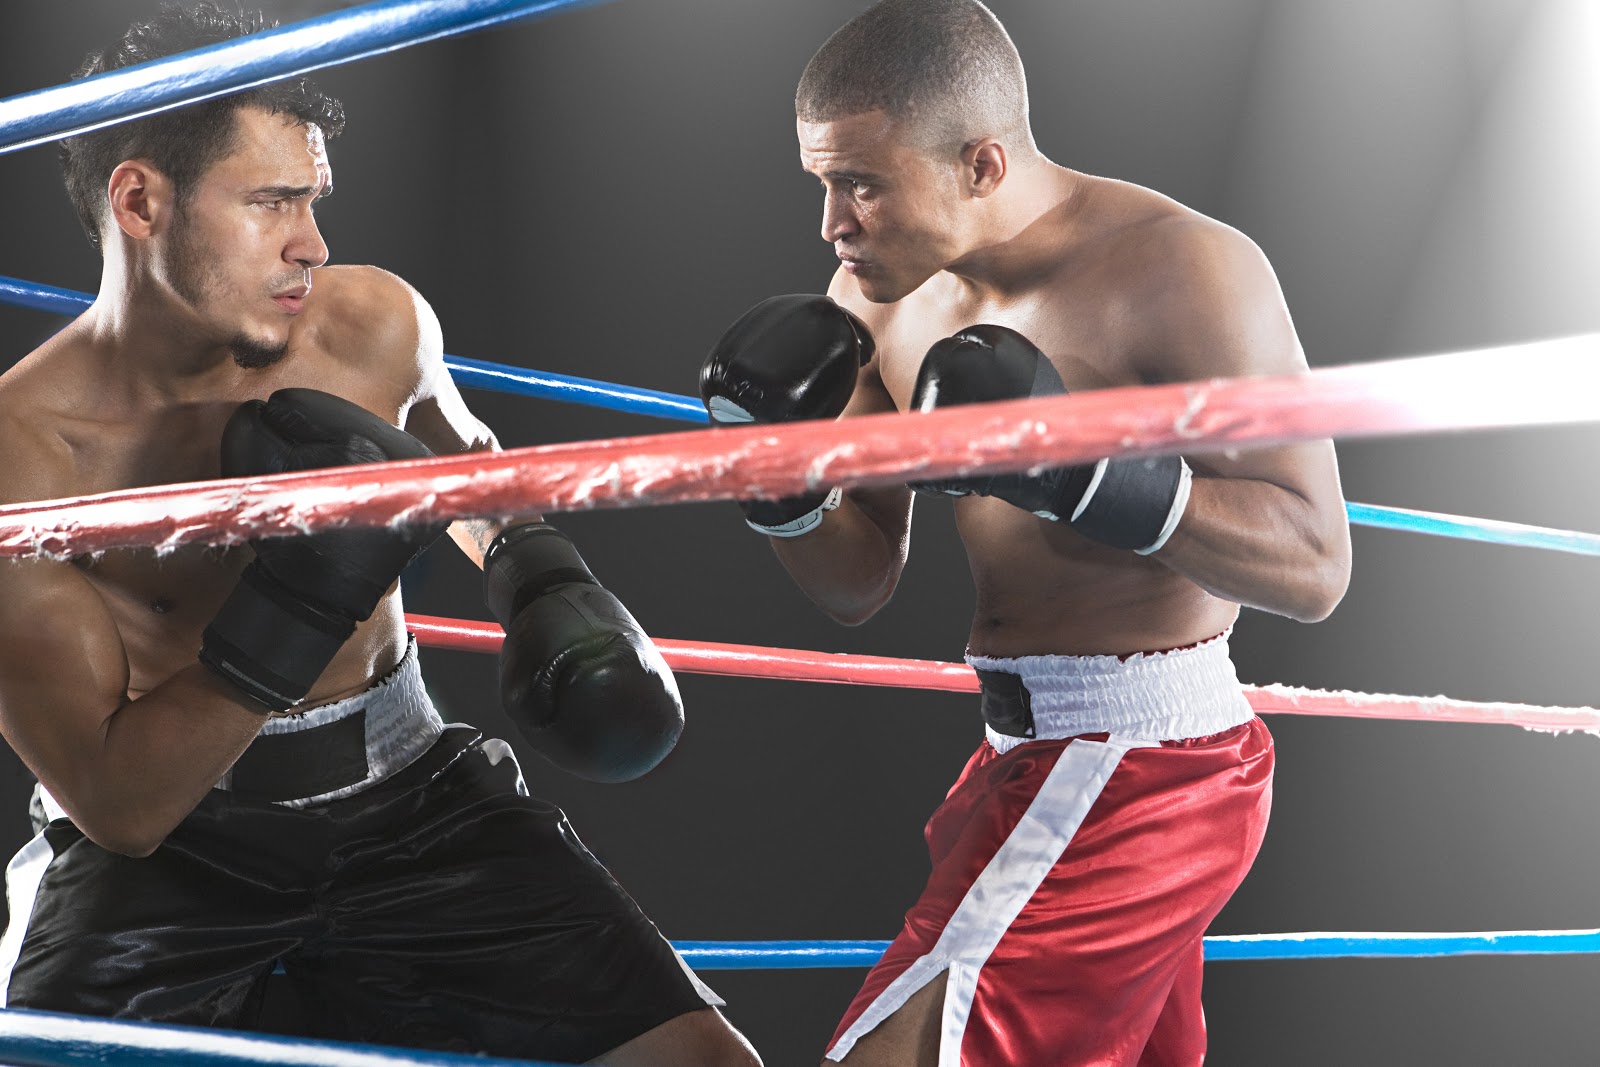 Two boxers in action in the ring, on one on the defensive and the other attacking.